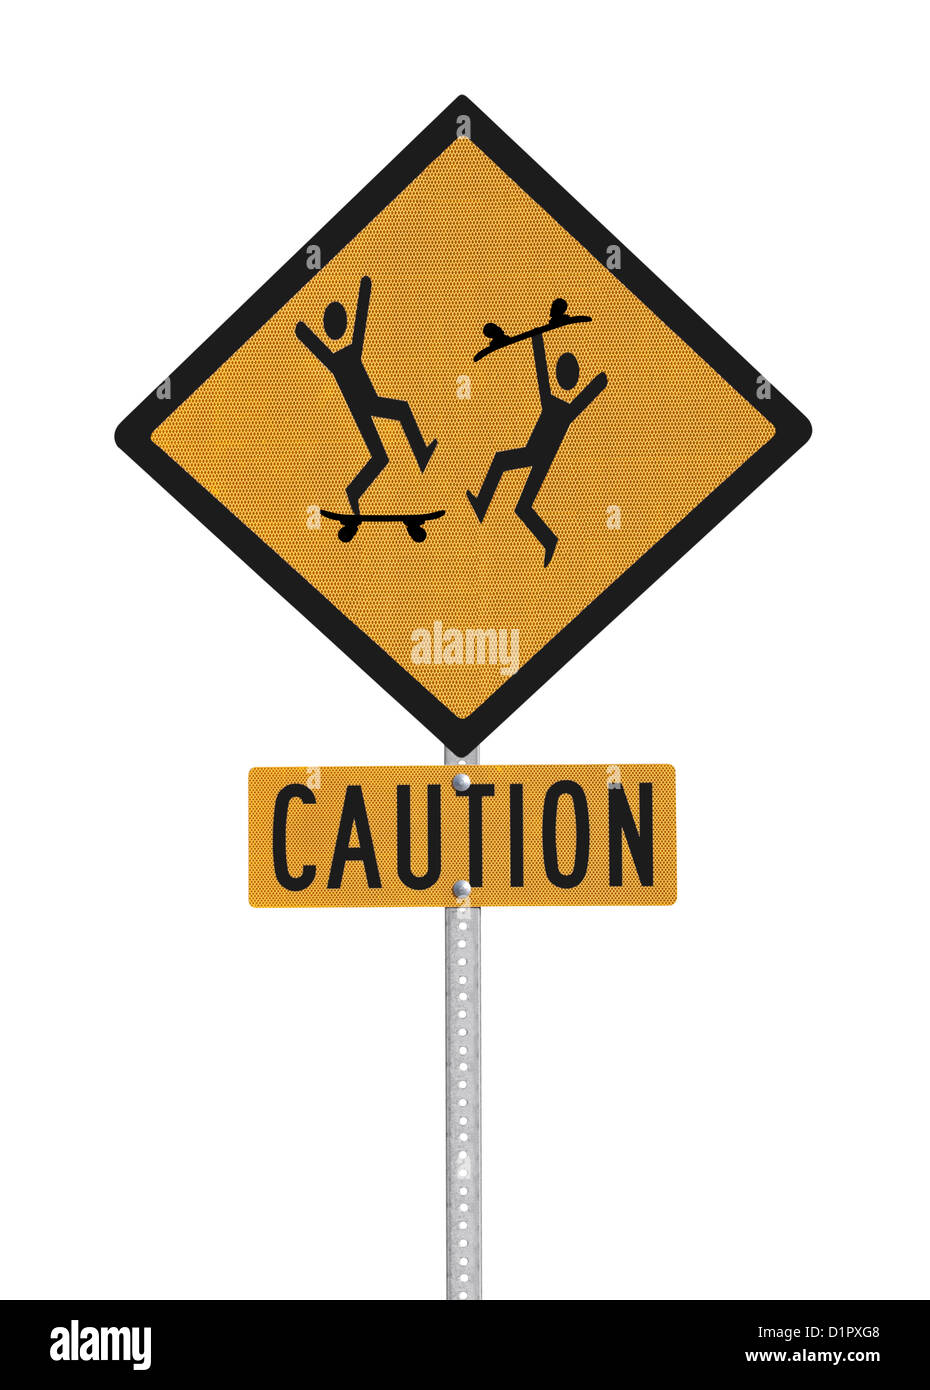 Crazy skate board riders caution sign isolated with clipping path. Stock Photo